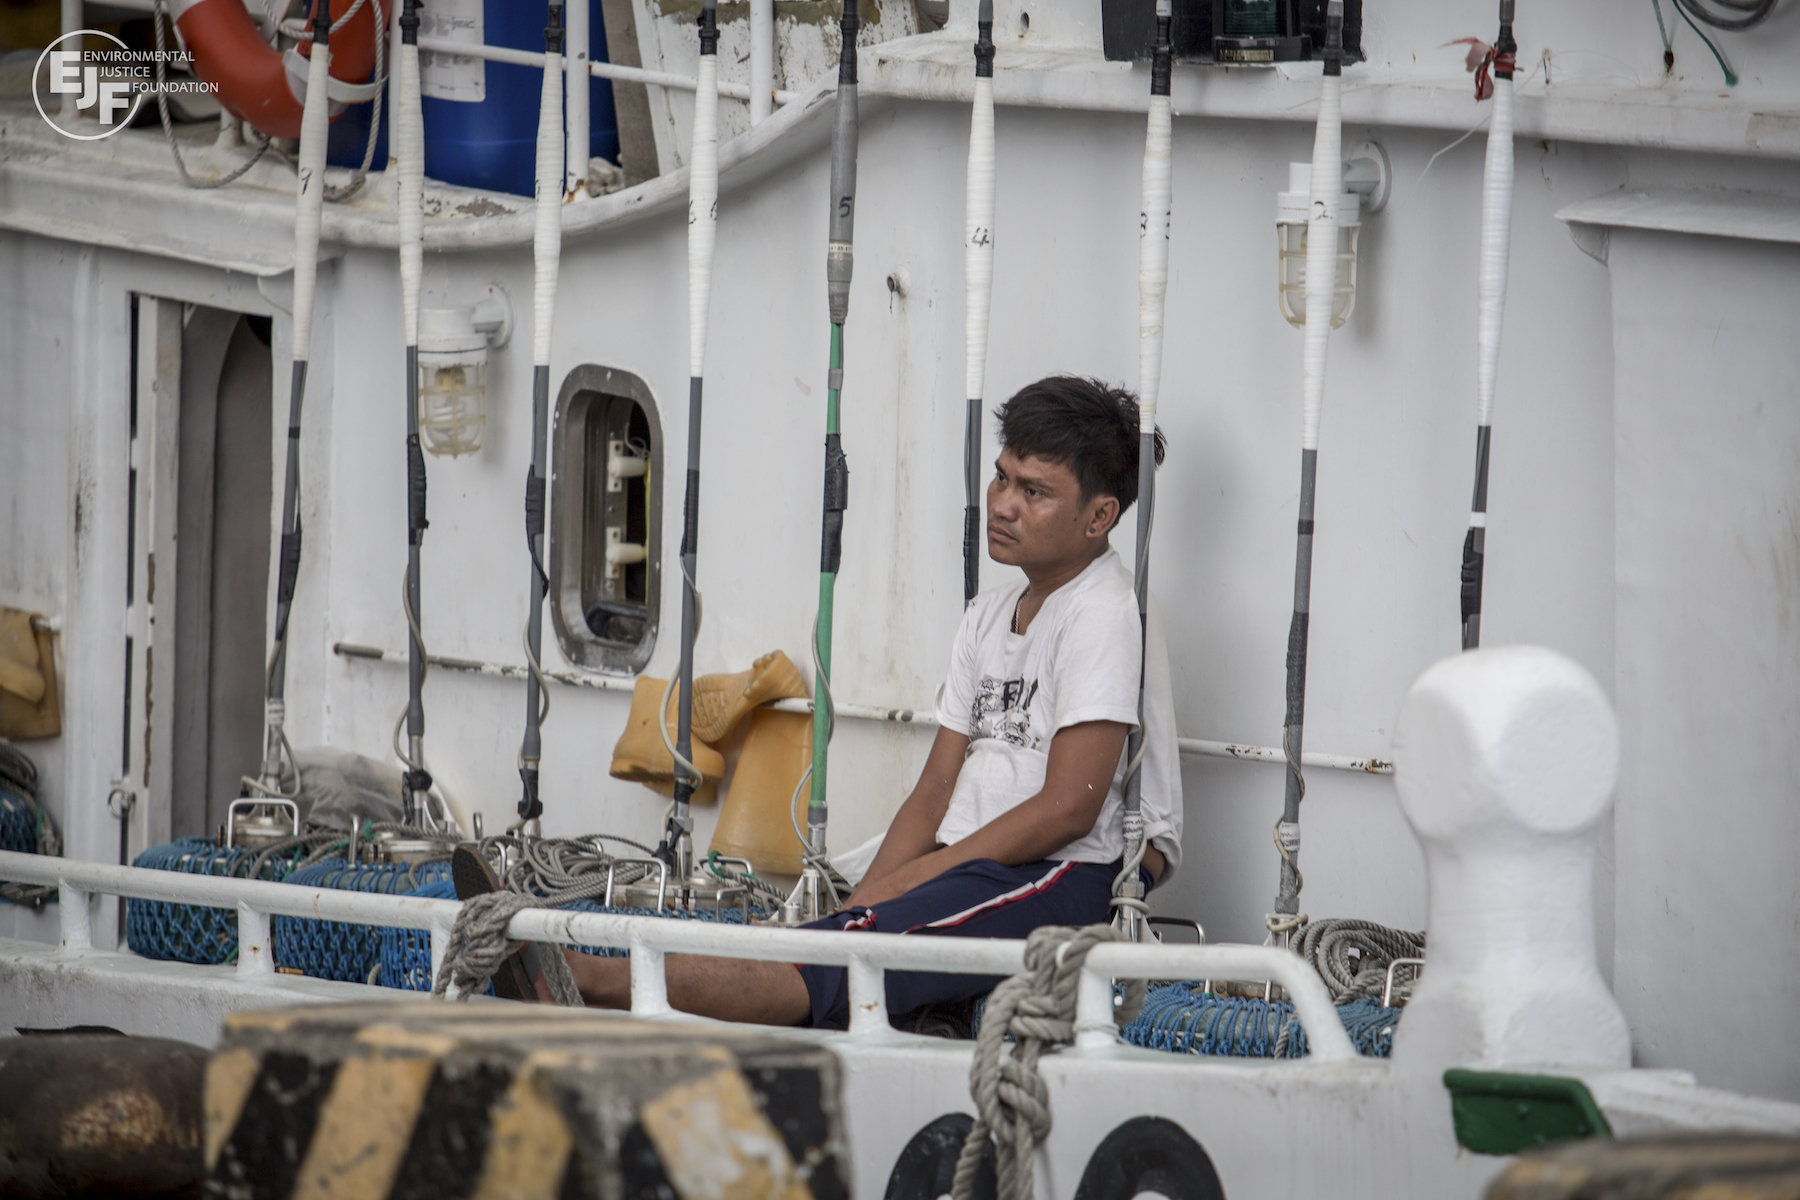 NGOs call on the Taiwanese government to end abuse of migrants fishers